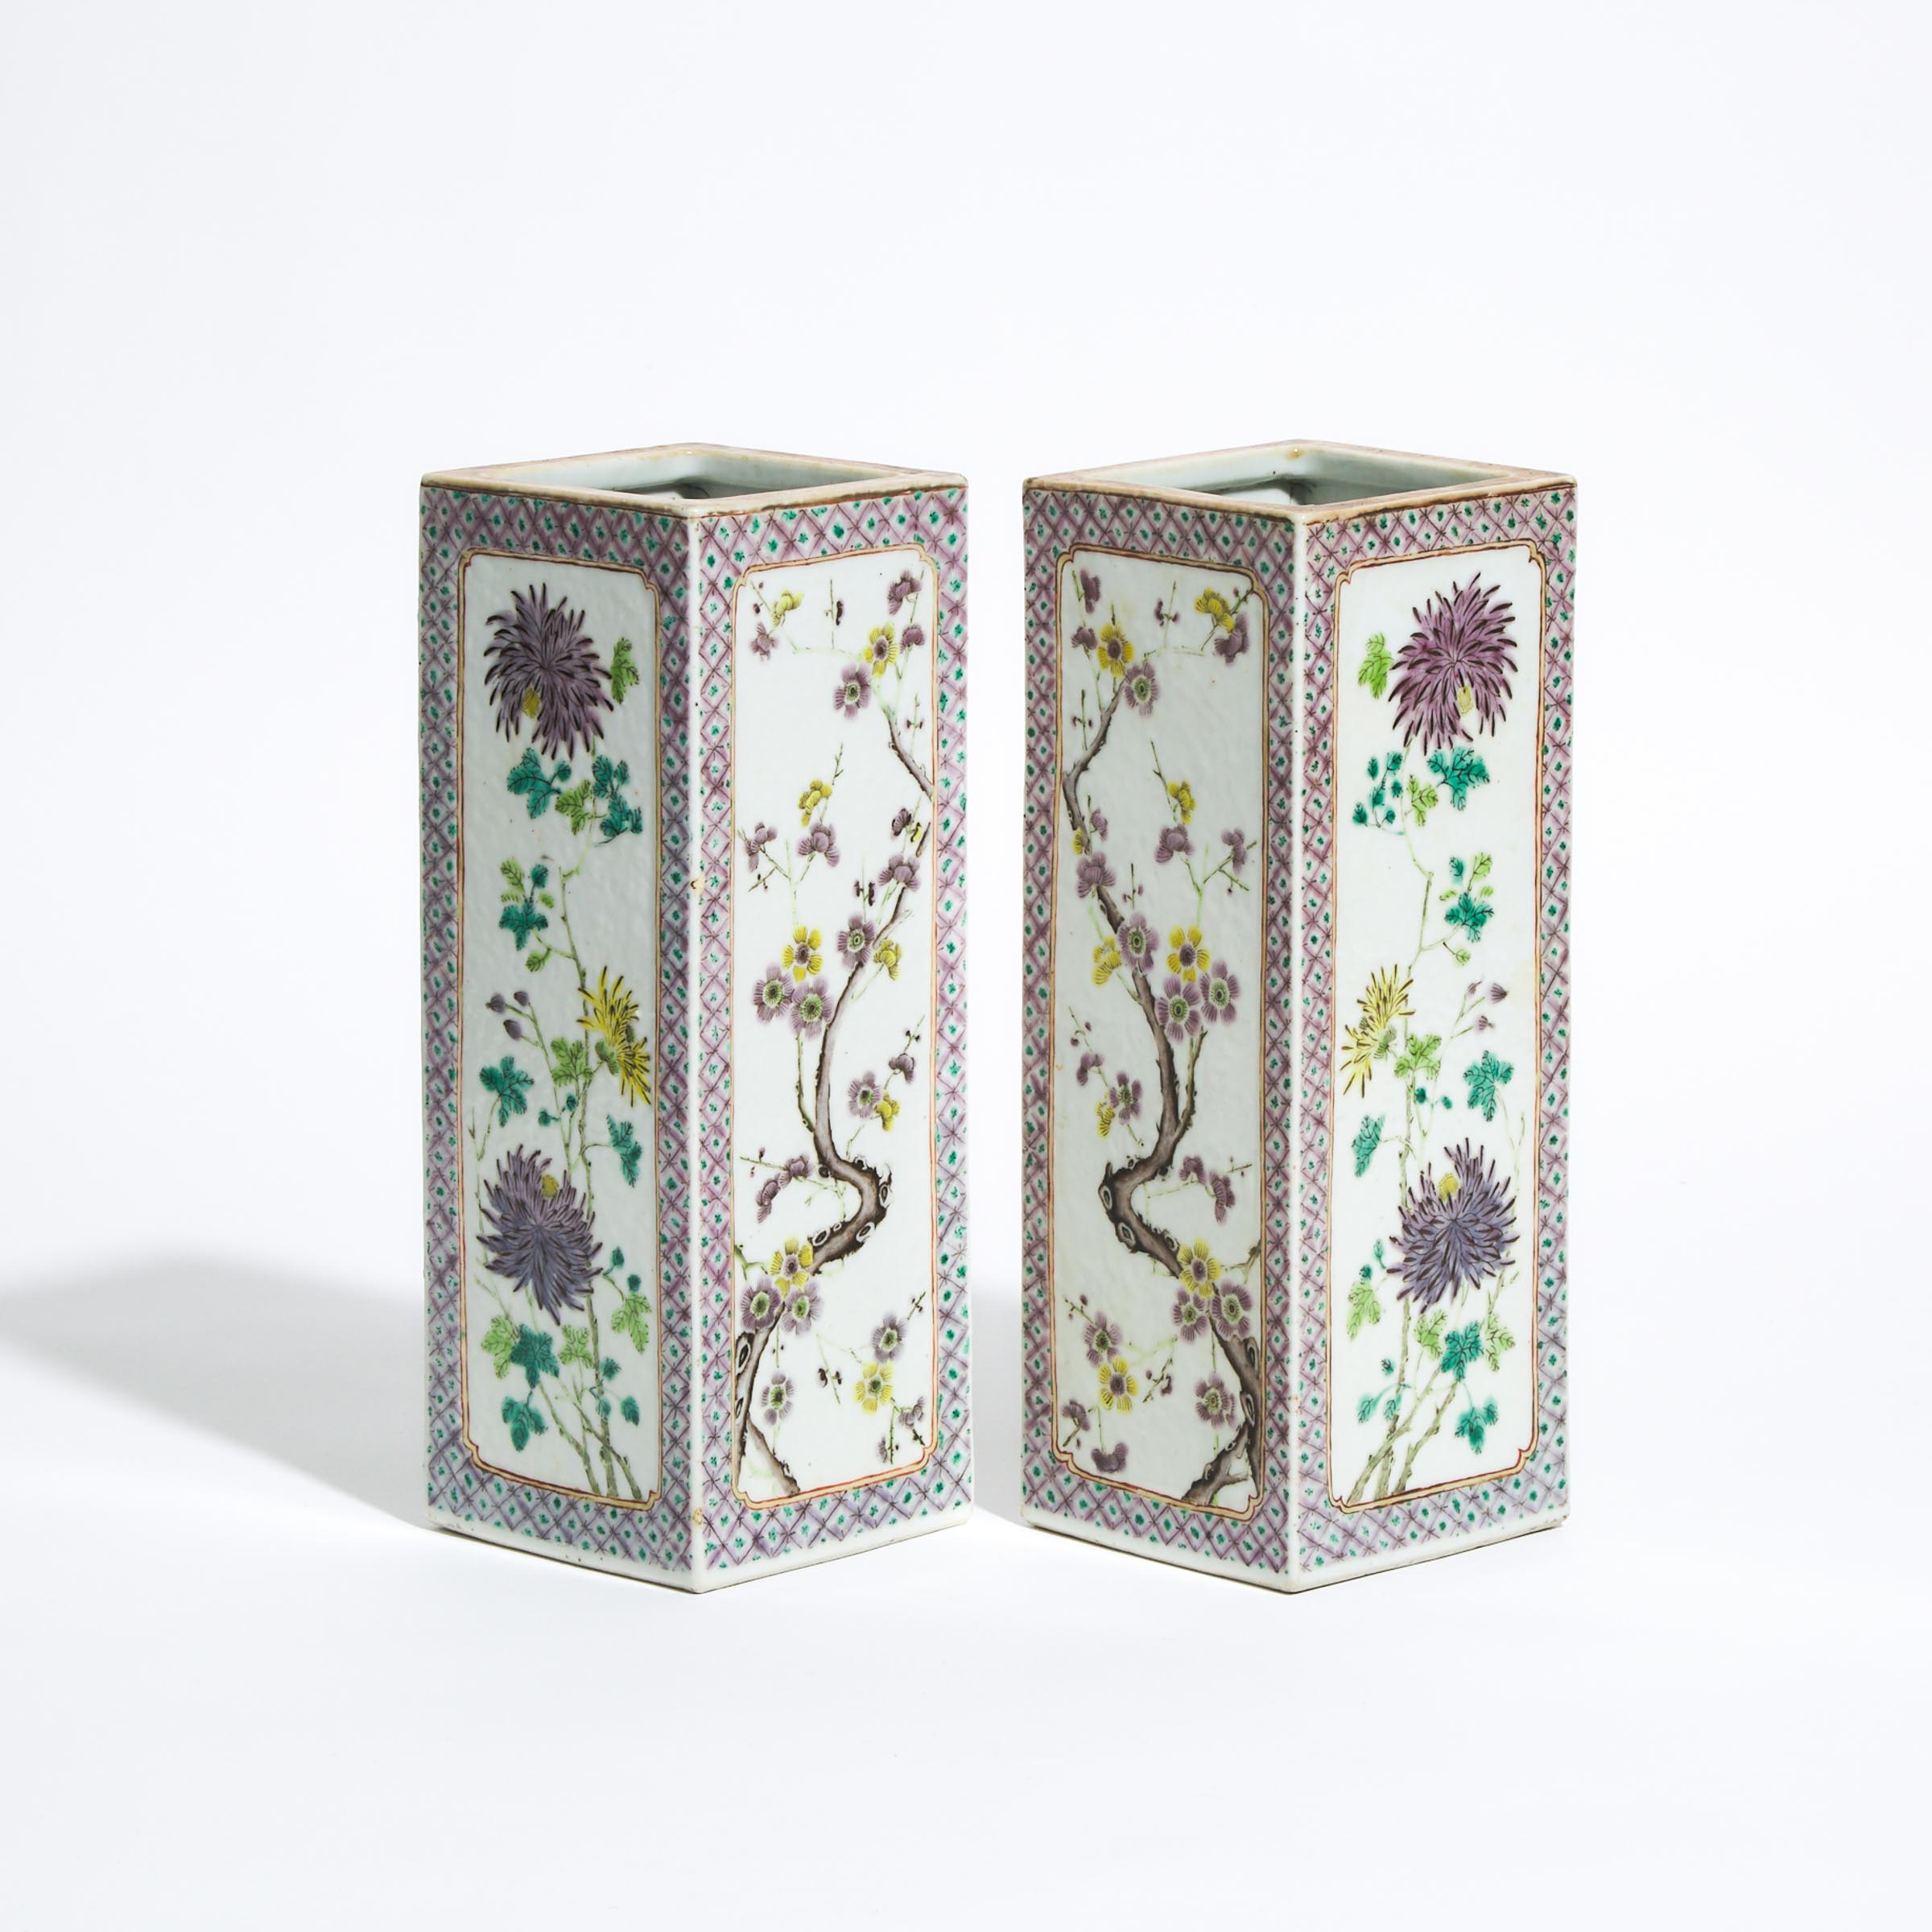 A Pair of Enameled Square Vases, Tongzhi Mark, Late 19th/Early 20th Century